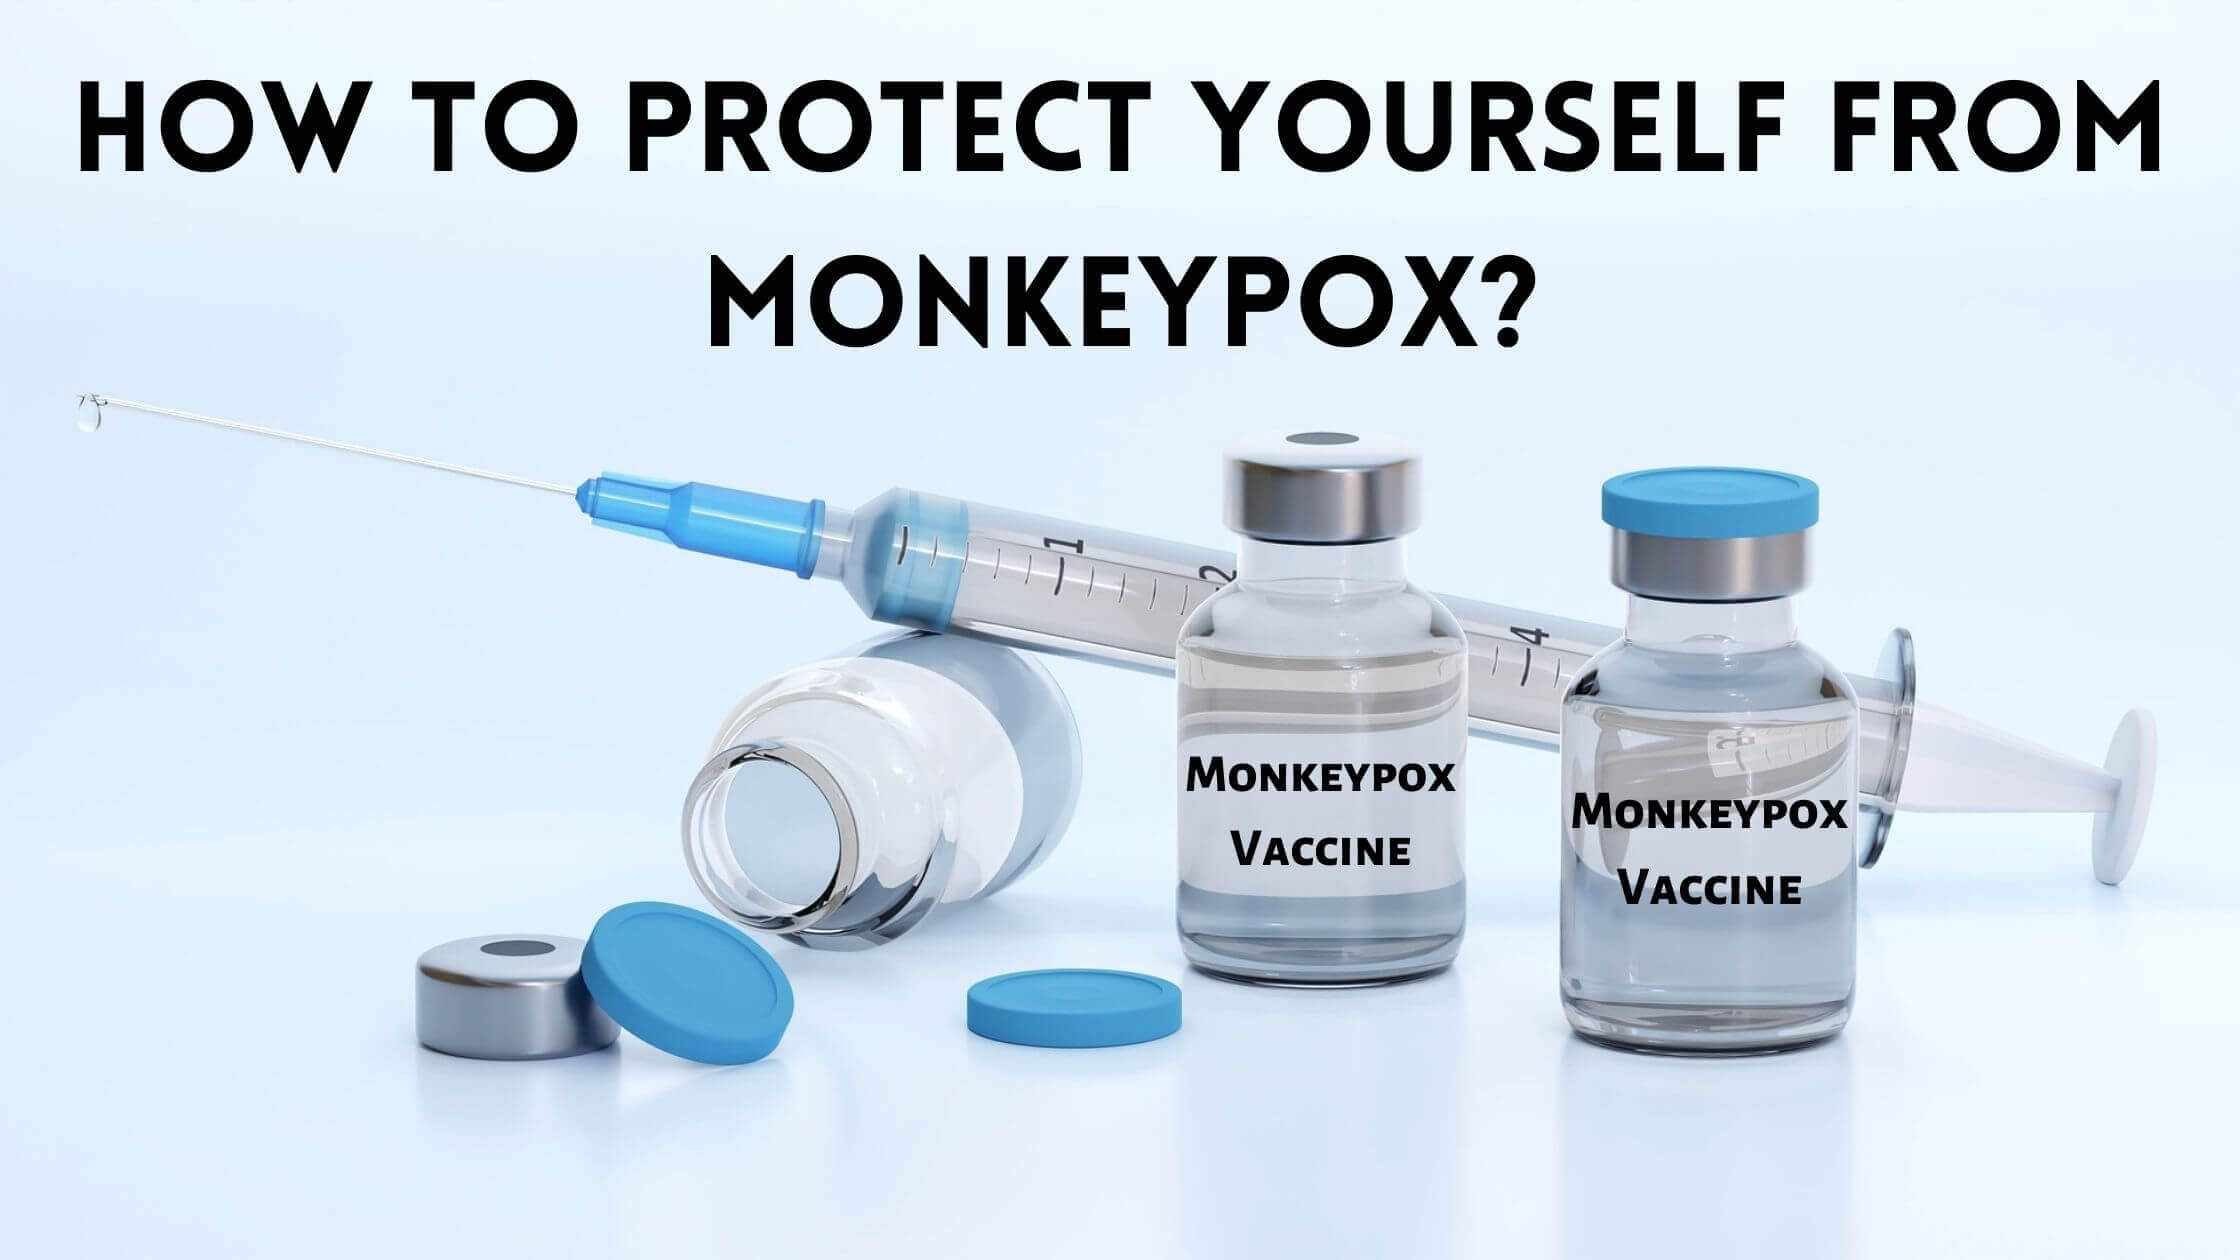 How to protect yourself from monkeypox